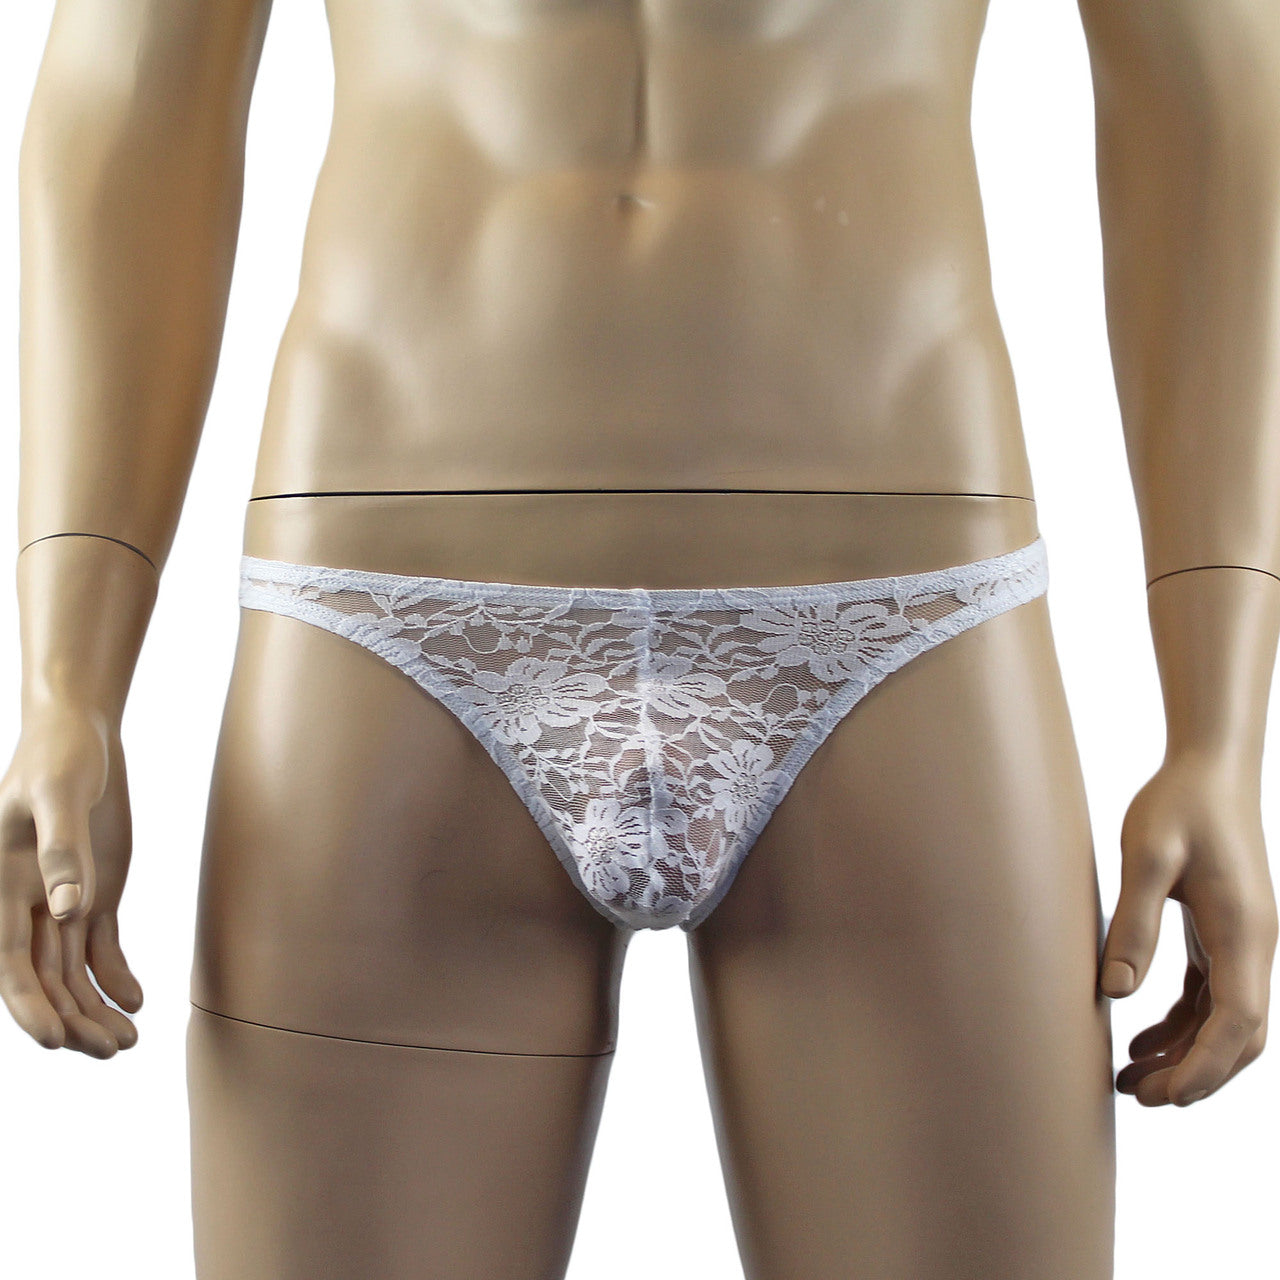 Mens Sexy Lingerie Lace Thong G string White